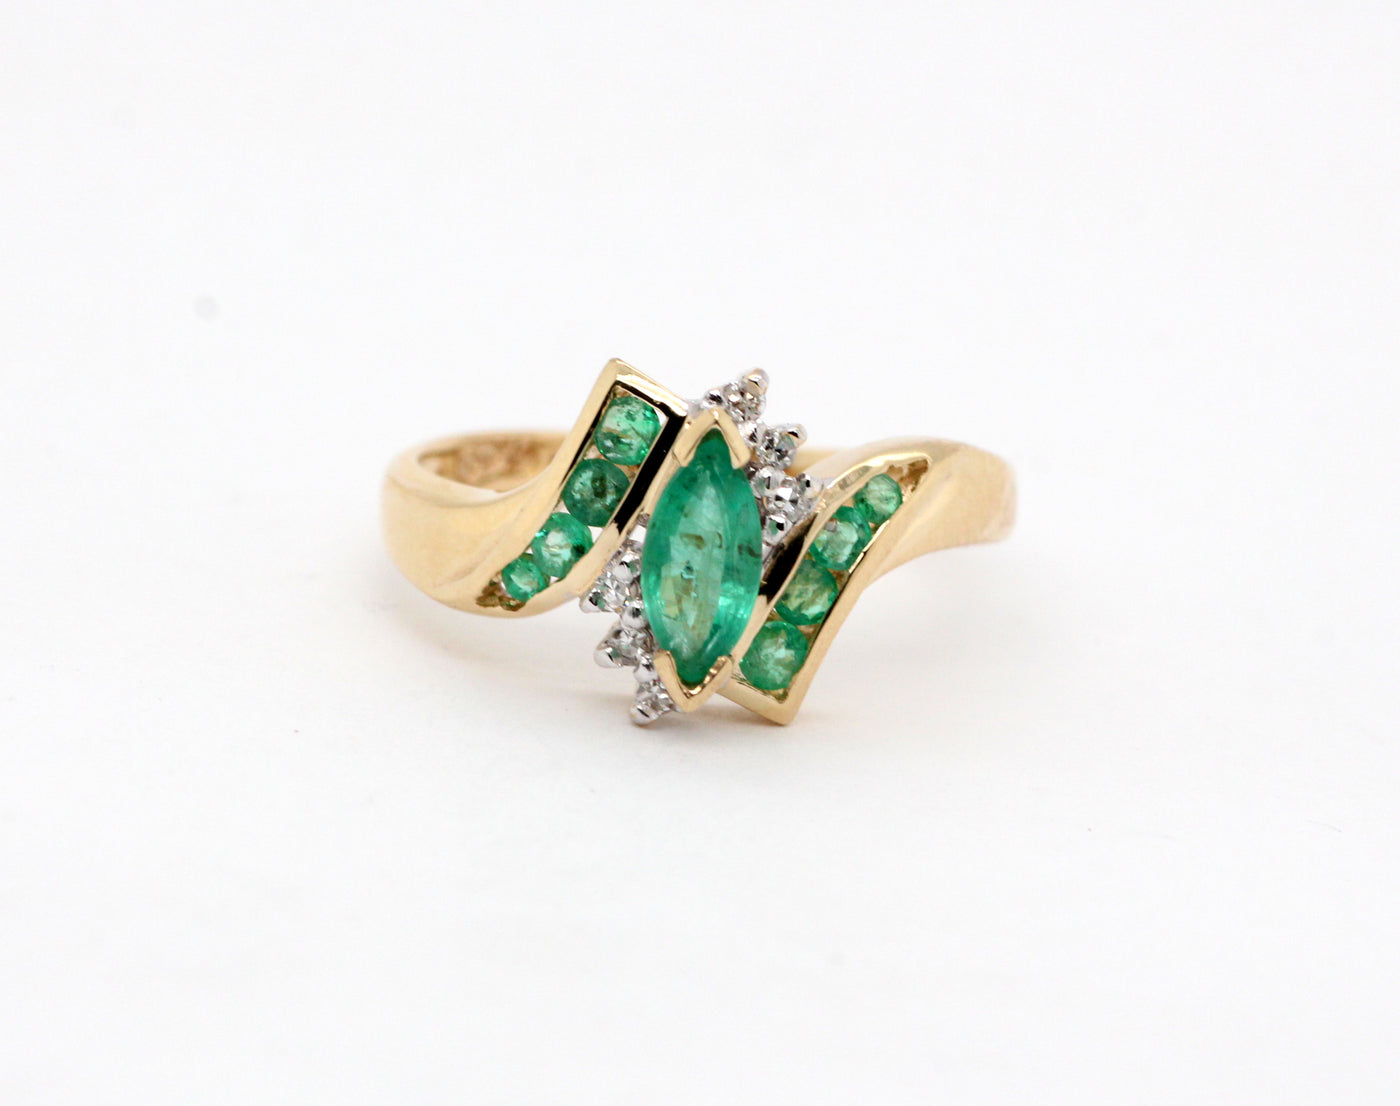 Estate 10ky .64 cttw emerald and diamond ring, .04 cttw h-si1